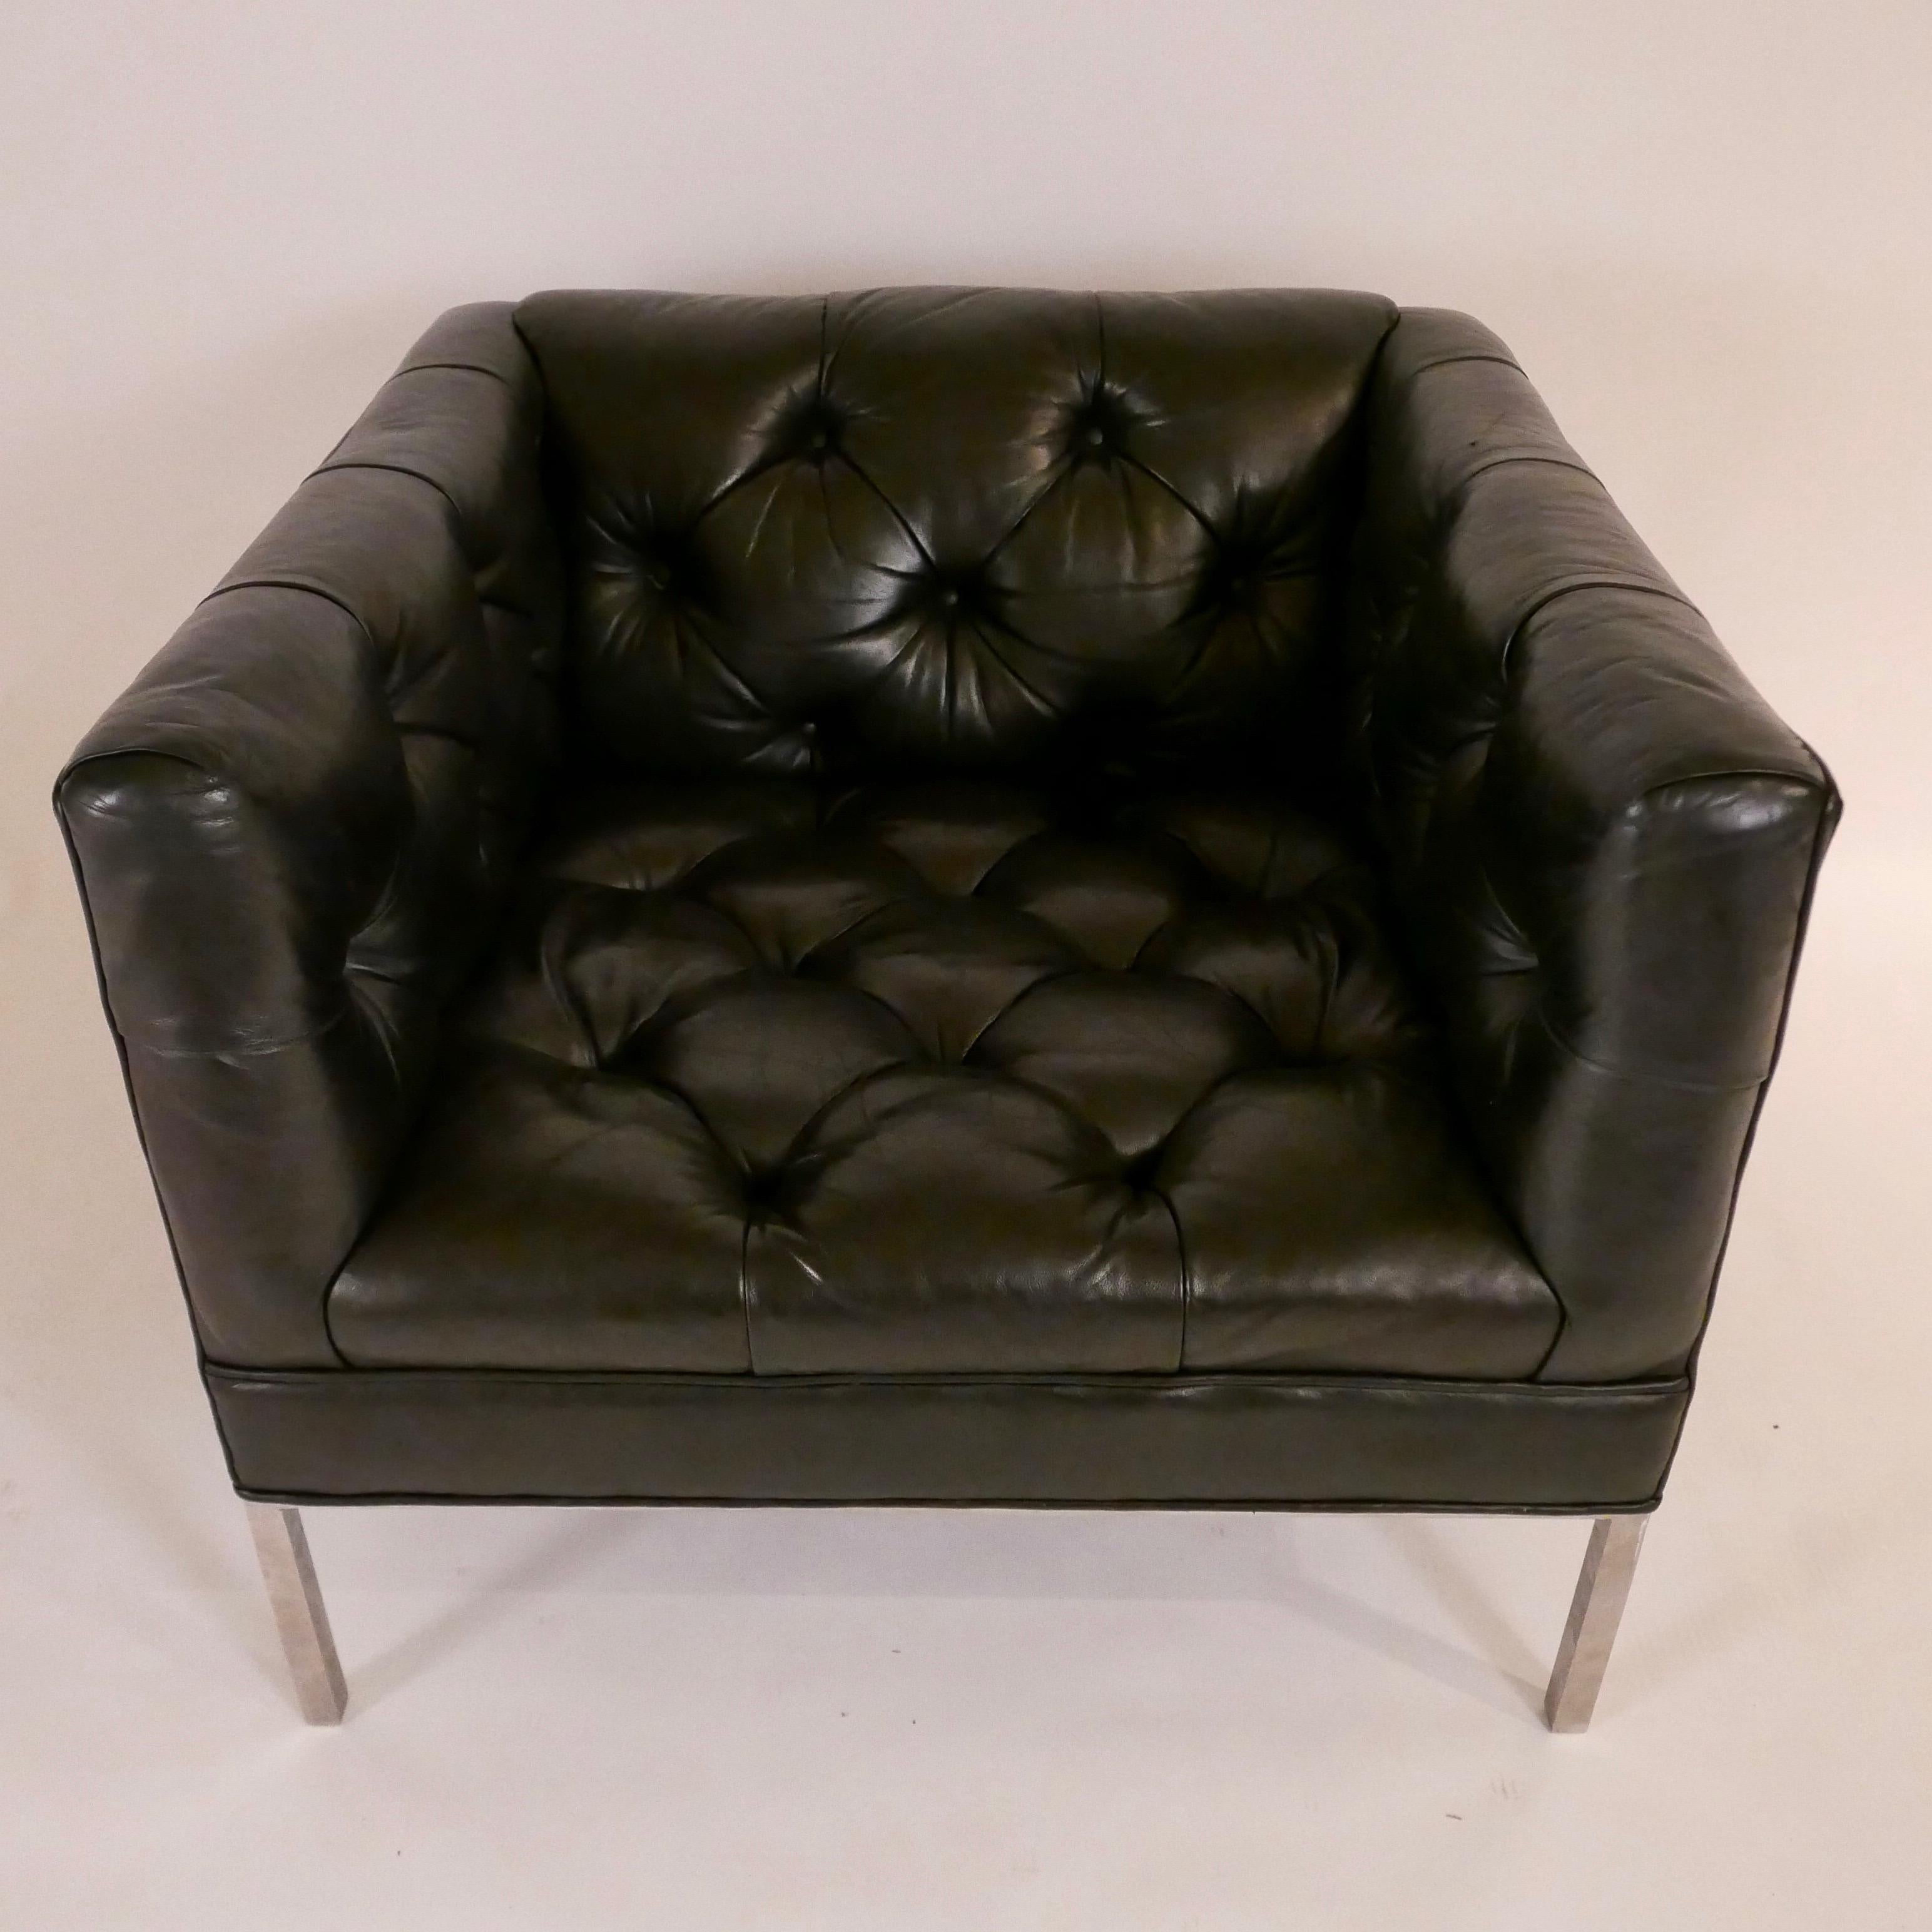 Architect Pair of Tufted Leather and Solid Stainless Steel Tuxedo Club Chairs 3